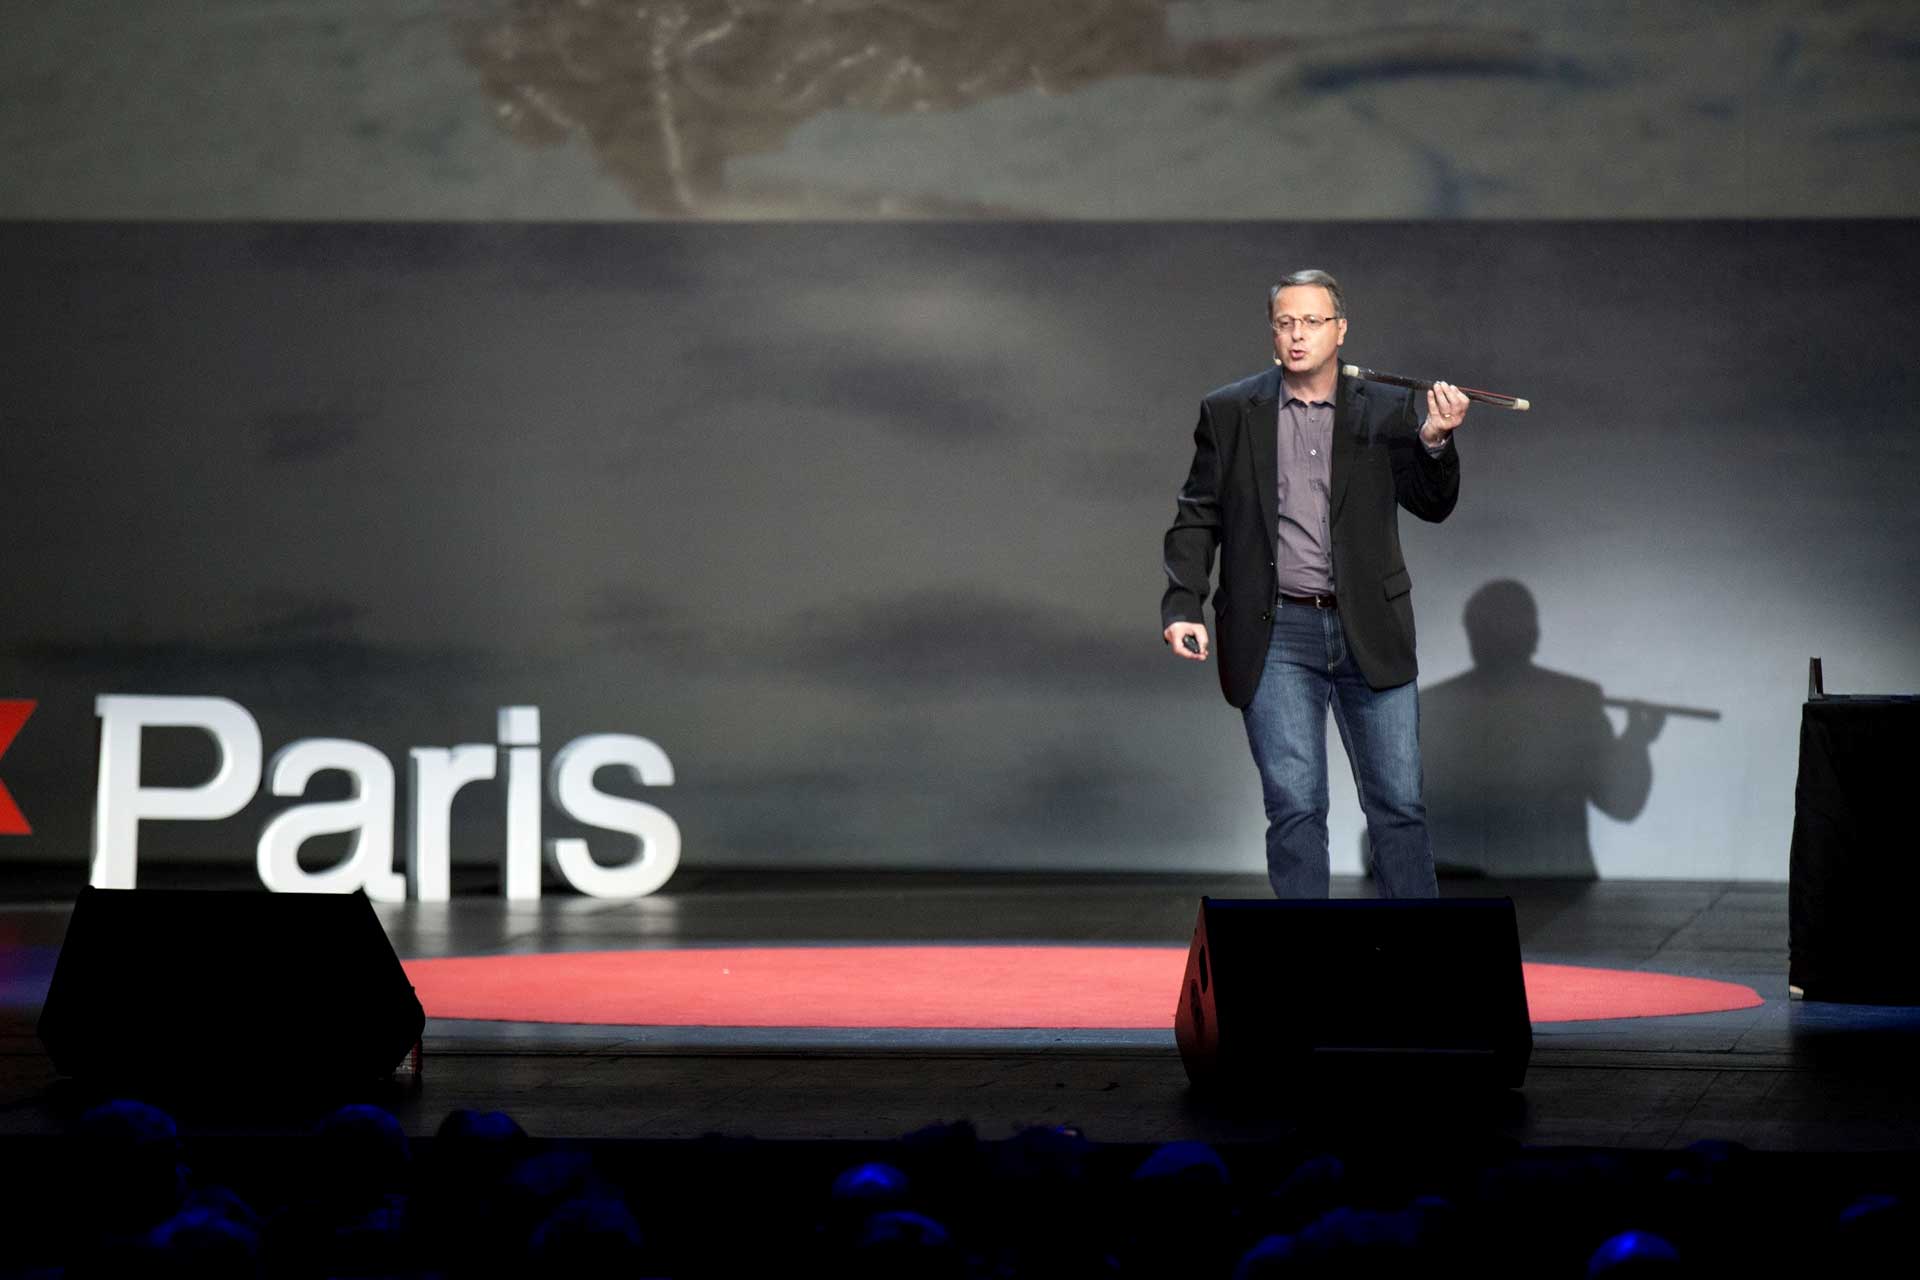 conference-TEDxParis-2014-24.jpg